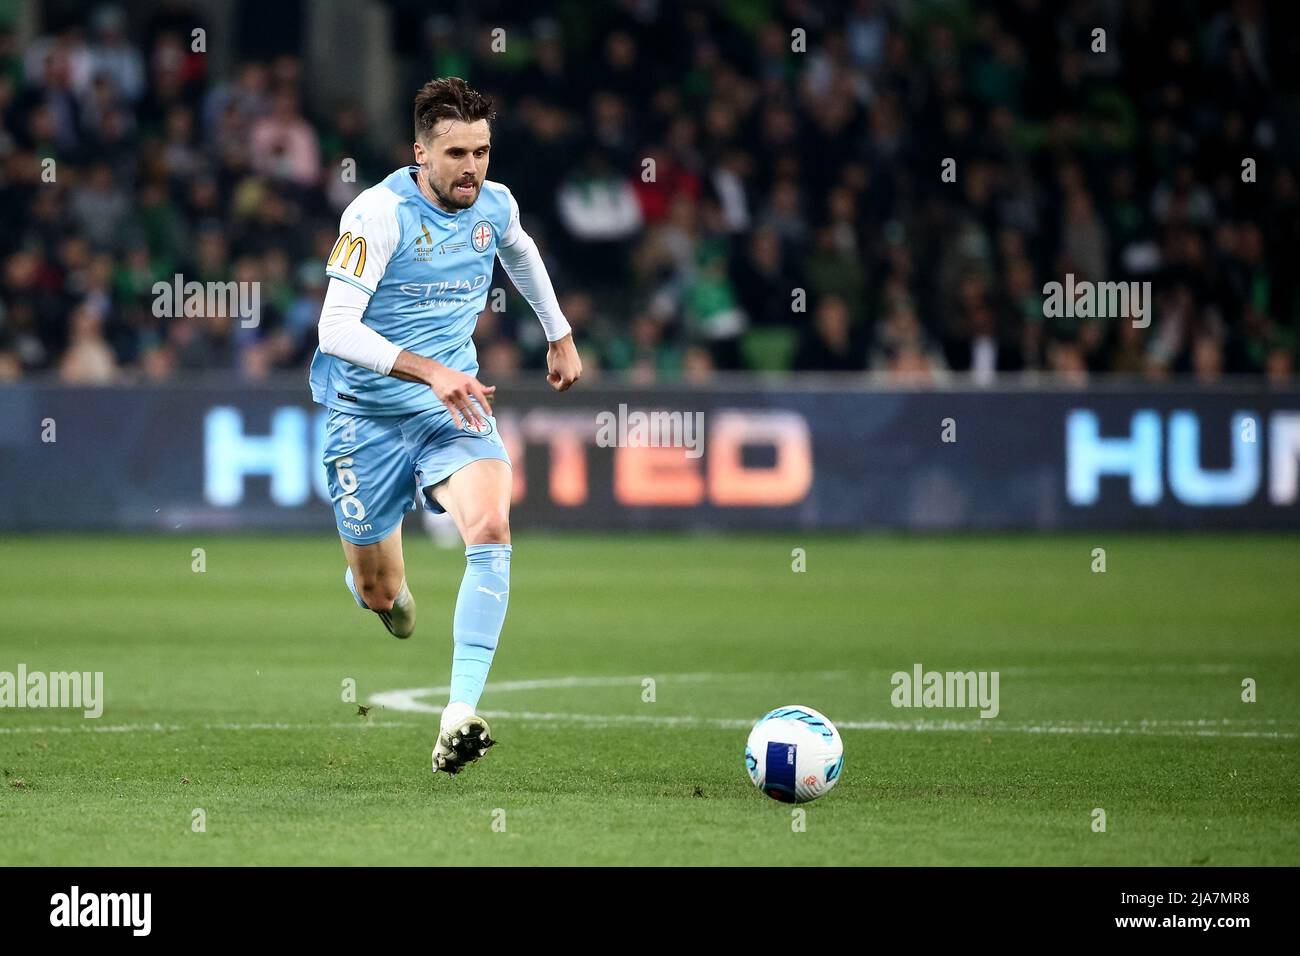 Melbourne, Australia, 28 May, 2022. Carl Jenkinson of Melbourne City FC controls the ball during the A-League Grand Final soccer match between Melbourne City FC and Western United at AAMI Park on May 28, 2022 in Melbourne, Australia. Credit: Dave Hewison/Speed Media/Alamy Live News Stock Photo